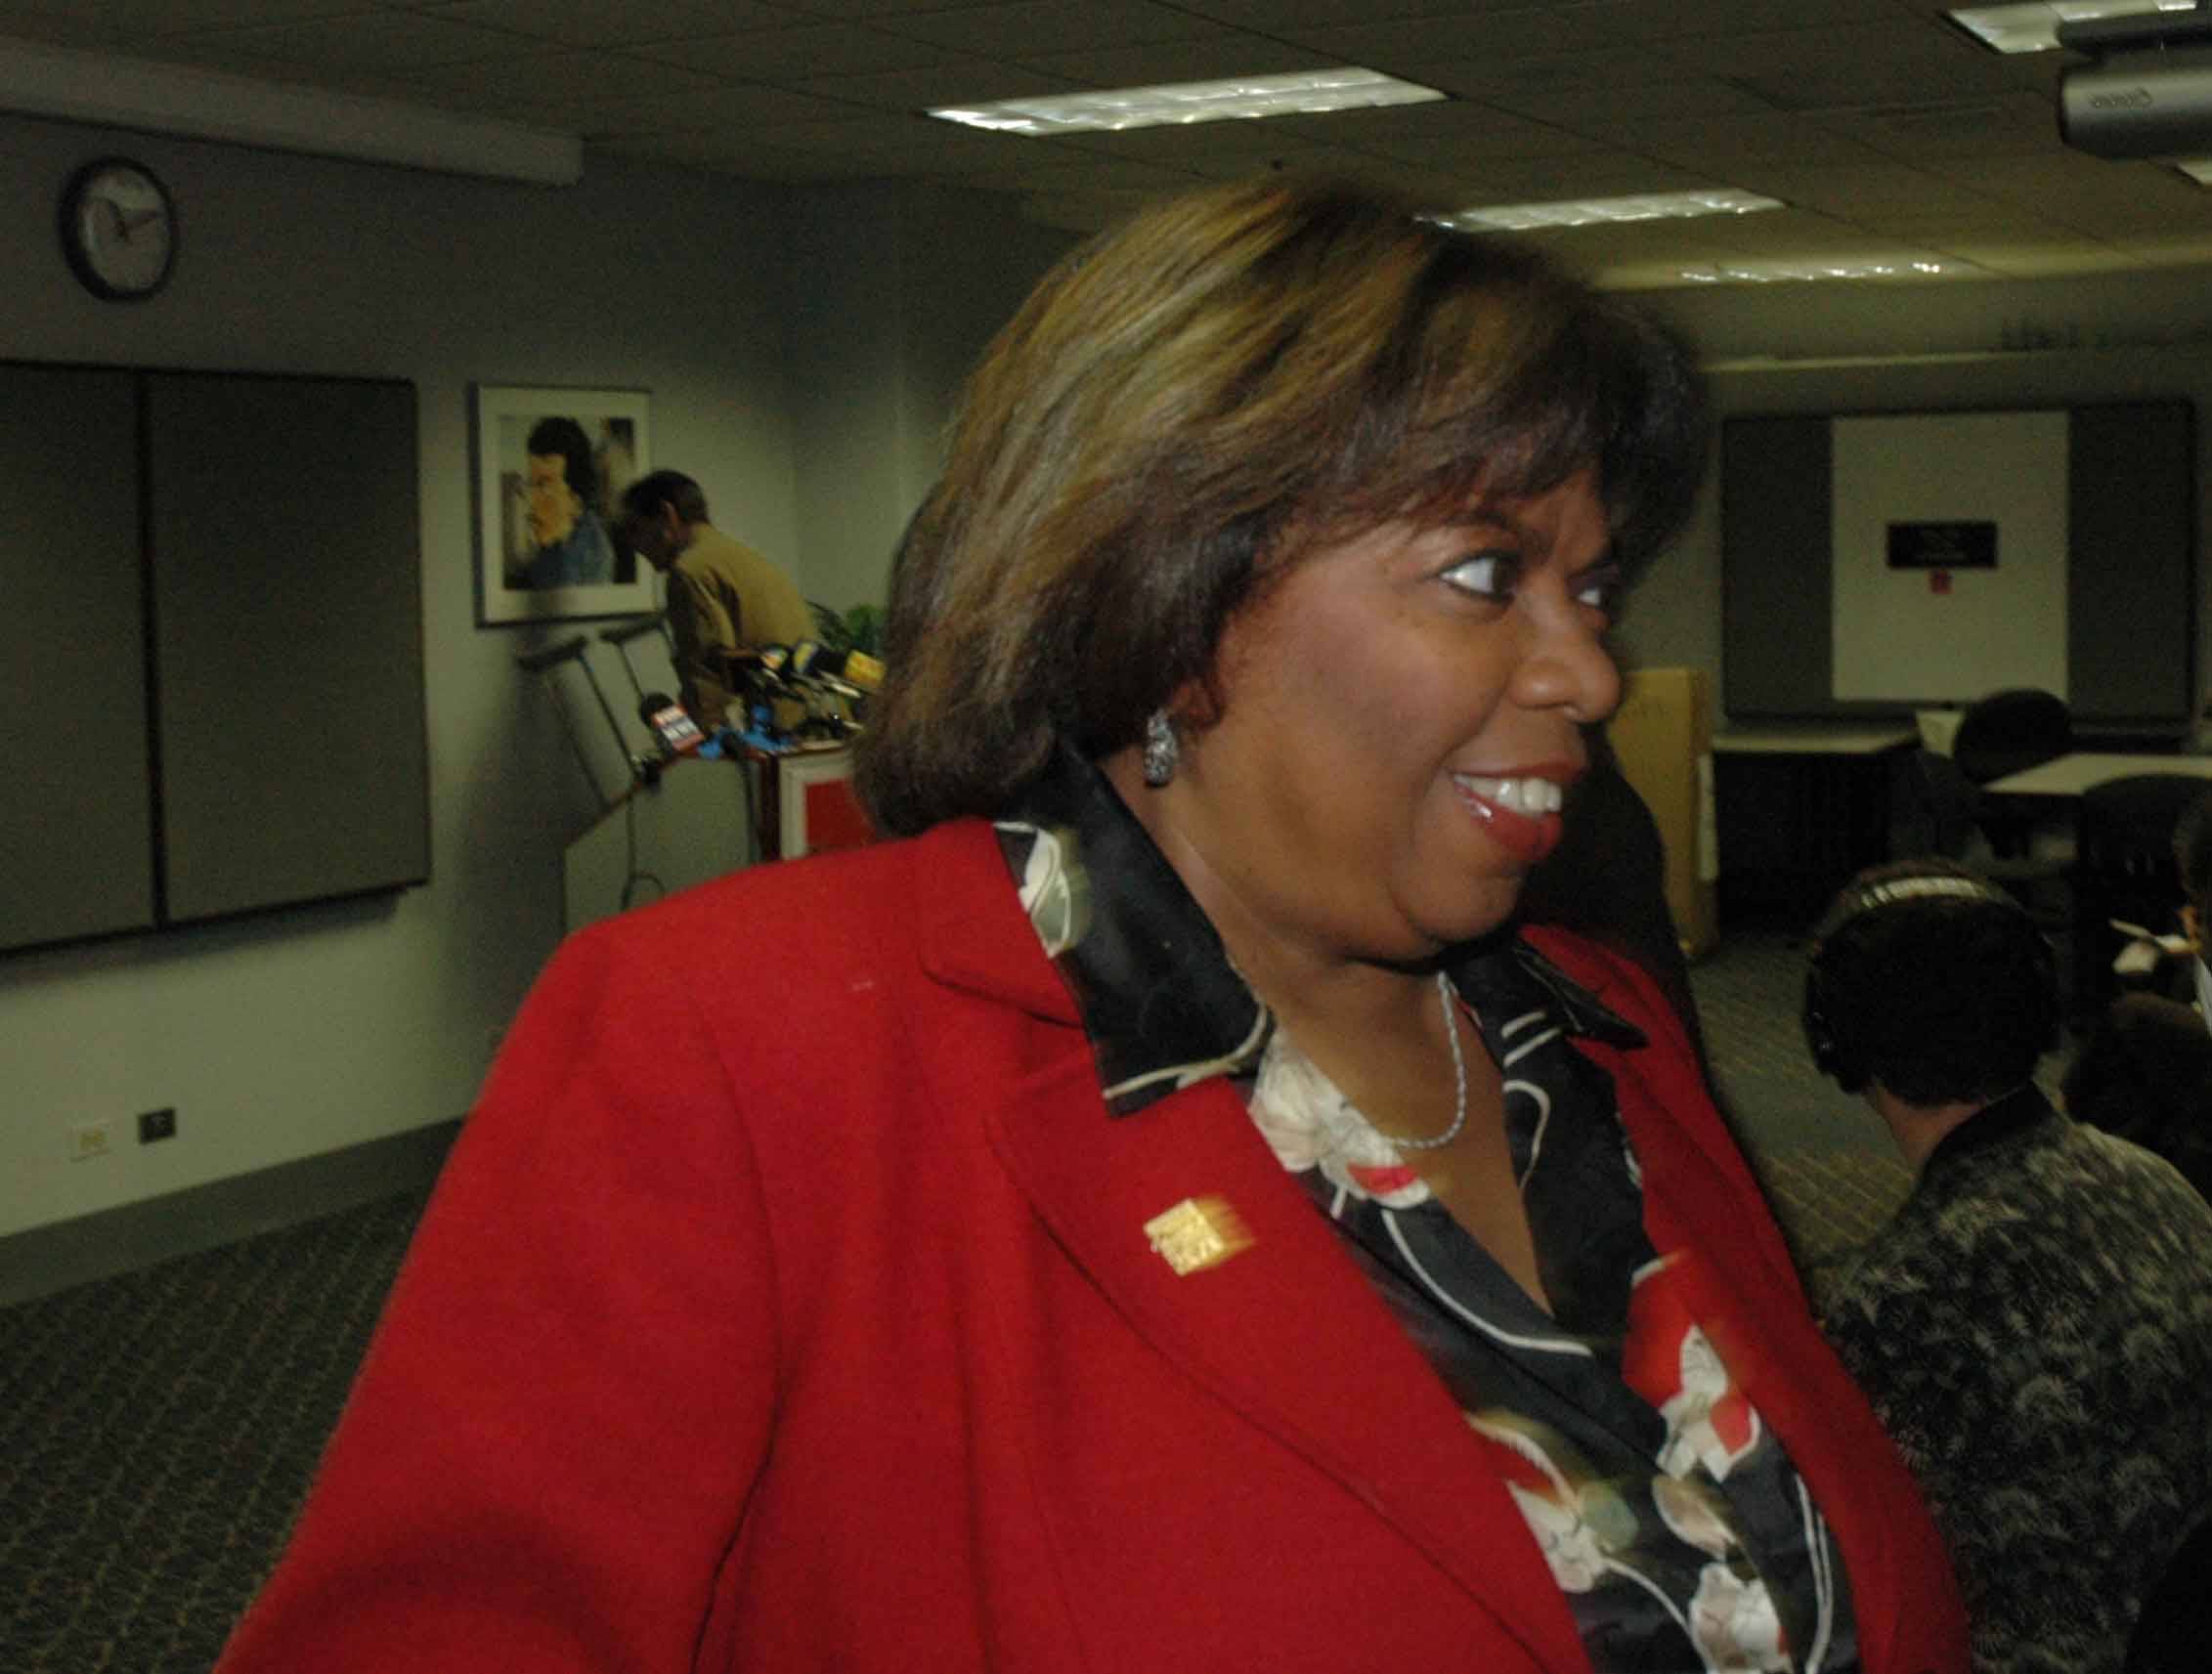 For more than a year, Marilyn Stewart (above), President of the Chicago Teachers Union, has lied about every key vote taken in the union’s House of Delegates. On August 31, 2007, she ignored the “No” votes against the contract she had negotiated with Mayor Daley’s lawyers. On June 4, 2008, the vote was against her budget. Stewart controls the people who count the votes and report the count to her, so she 